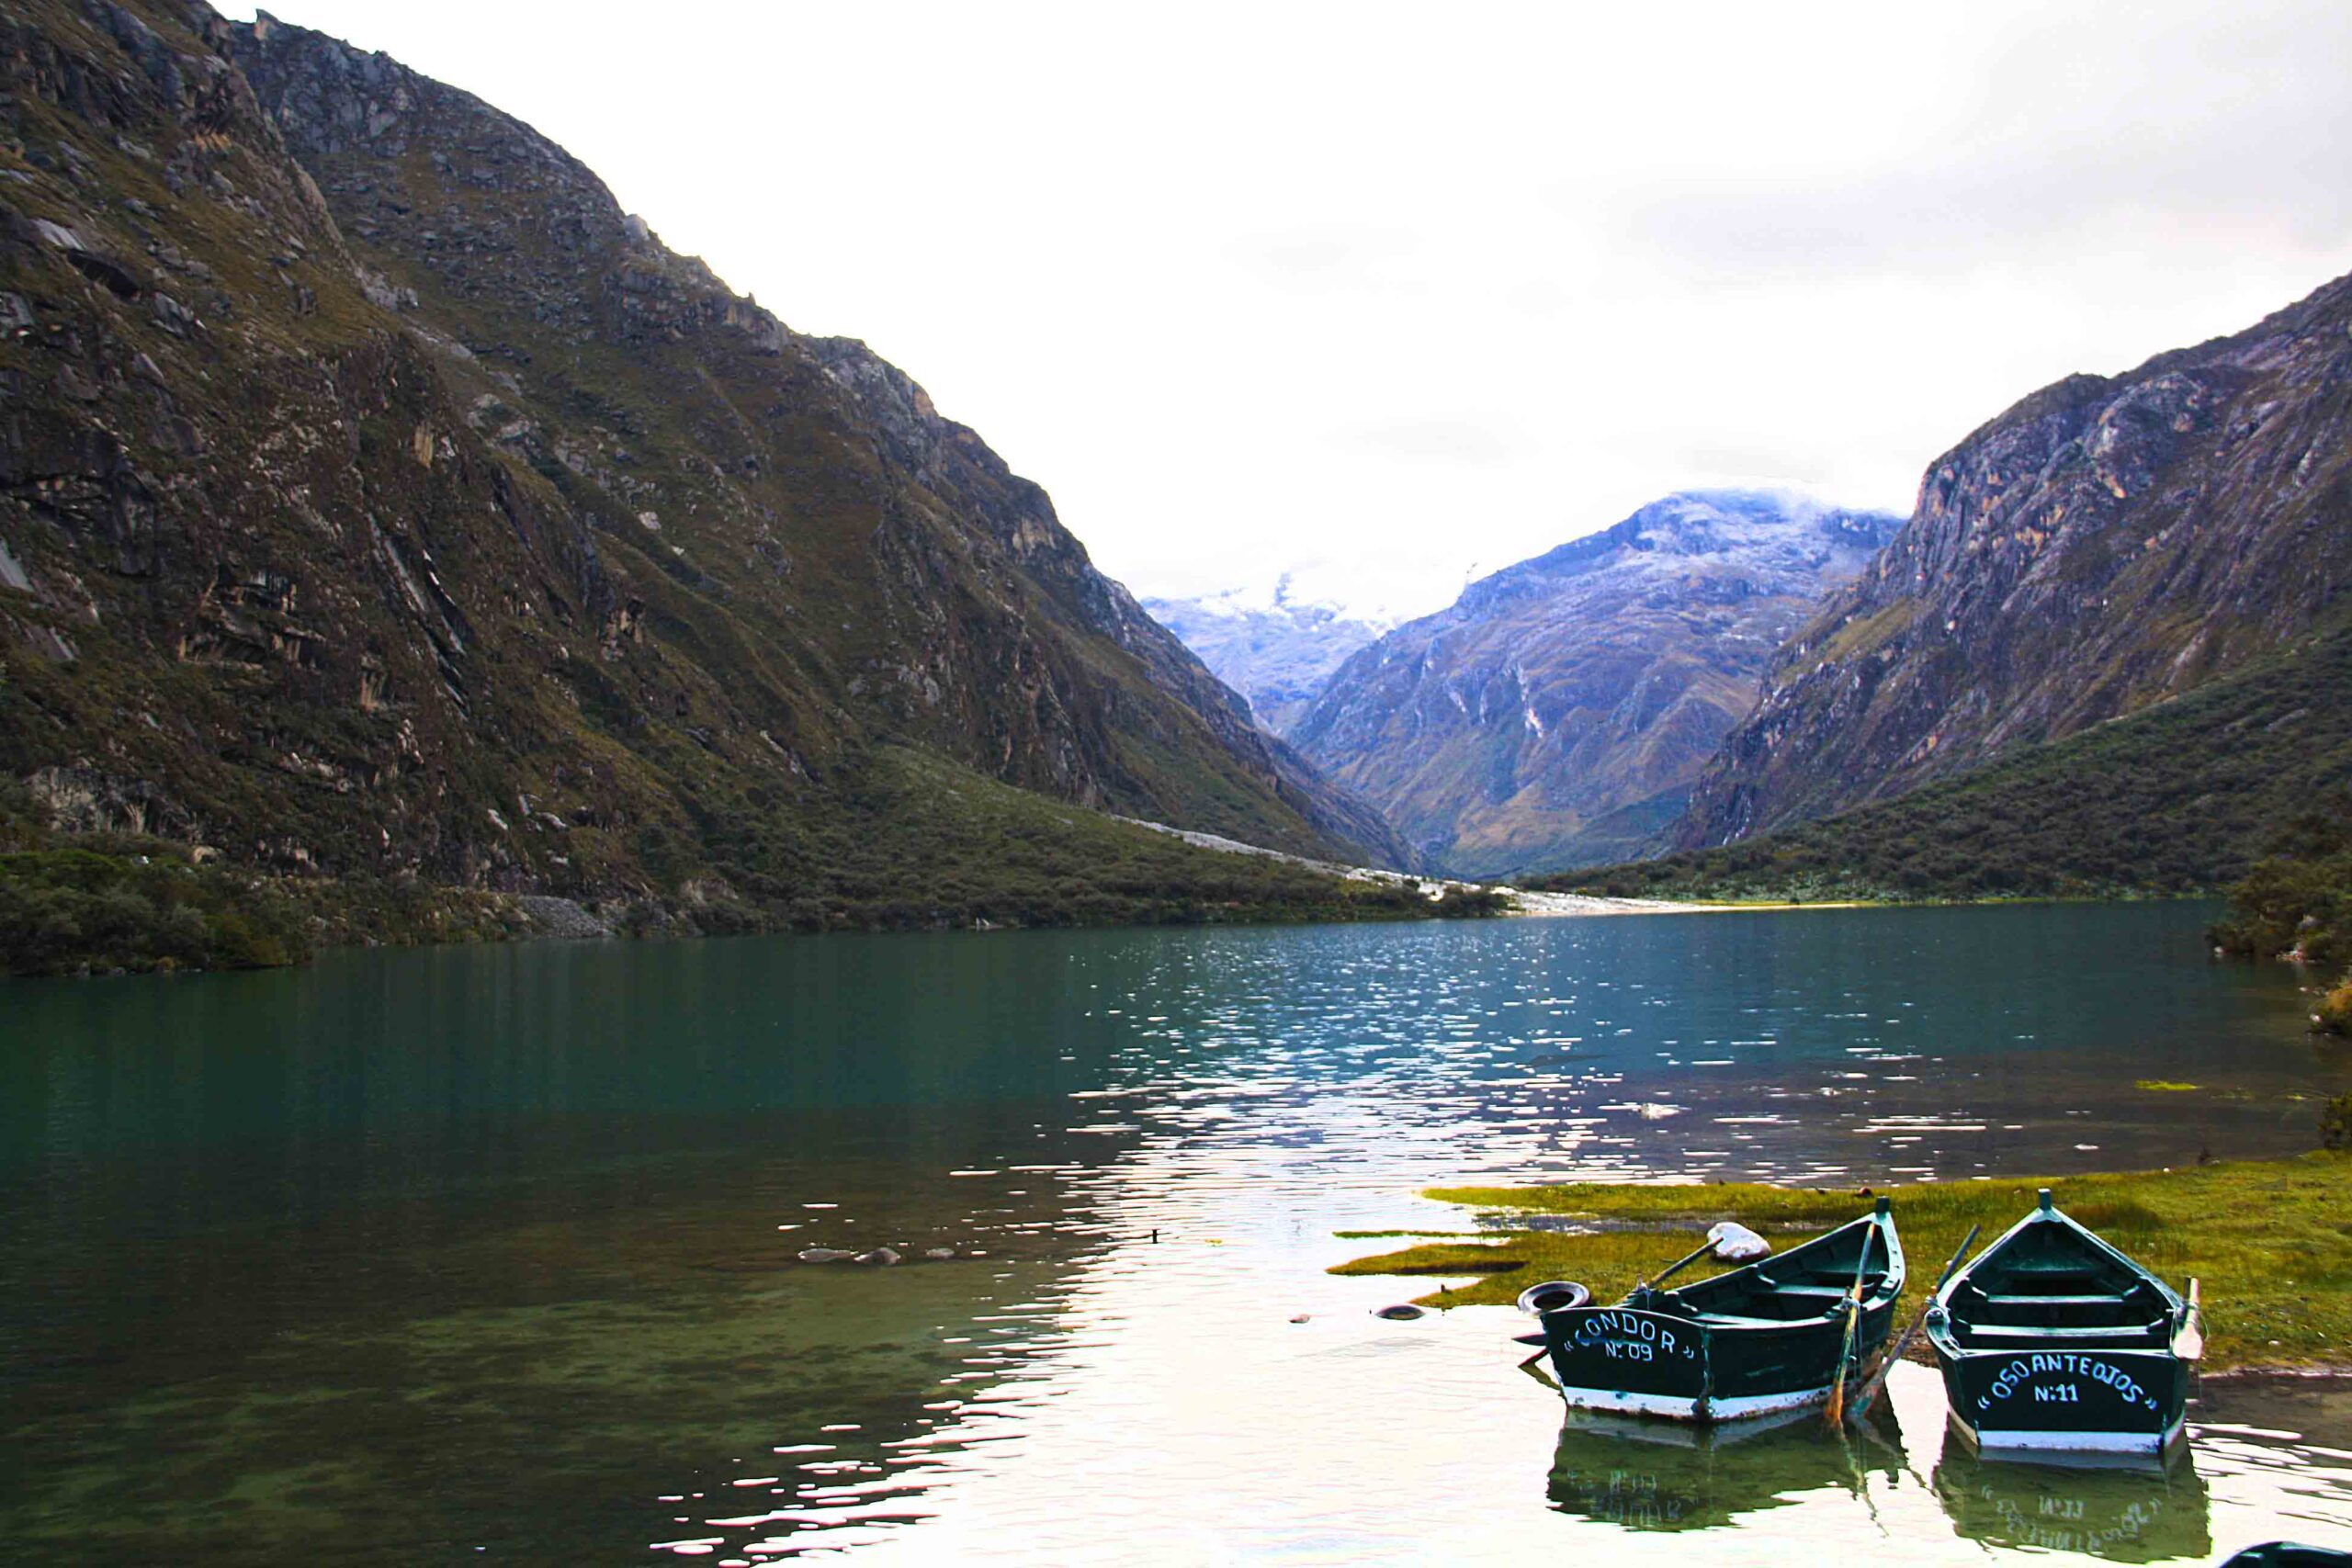 lake view with boats in the cordillera blanca